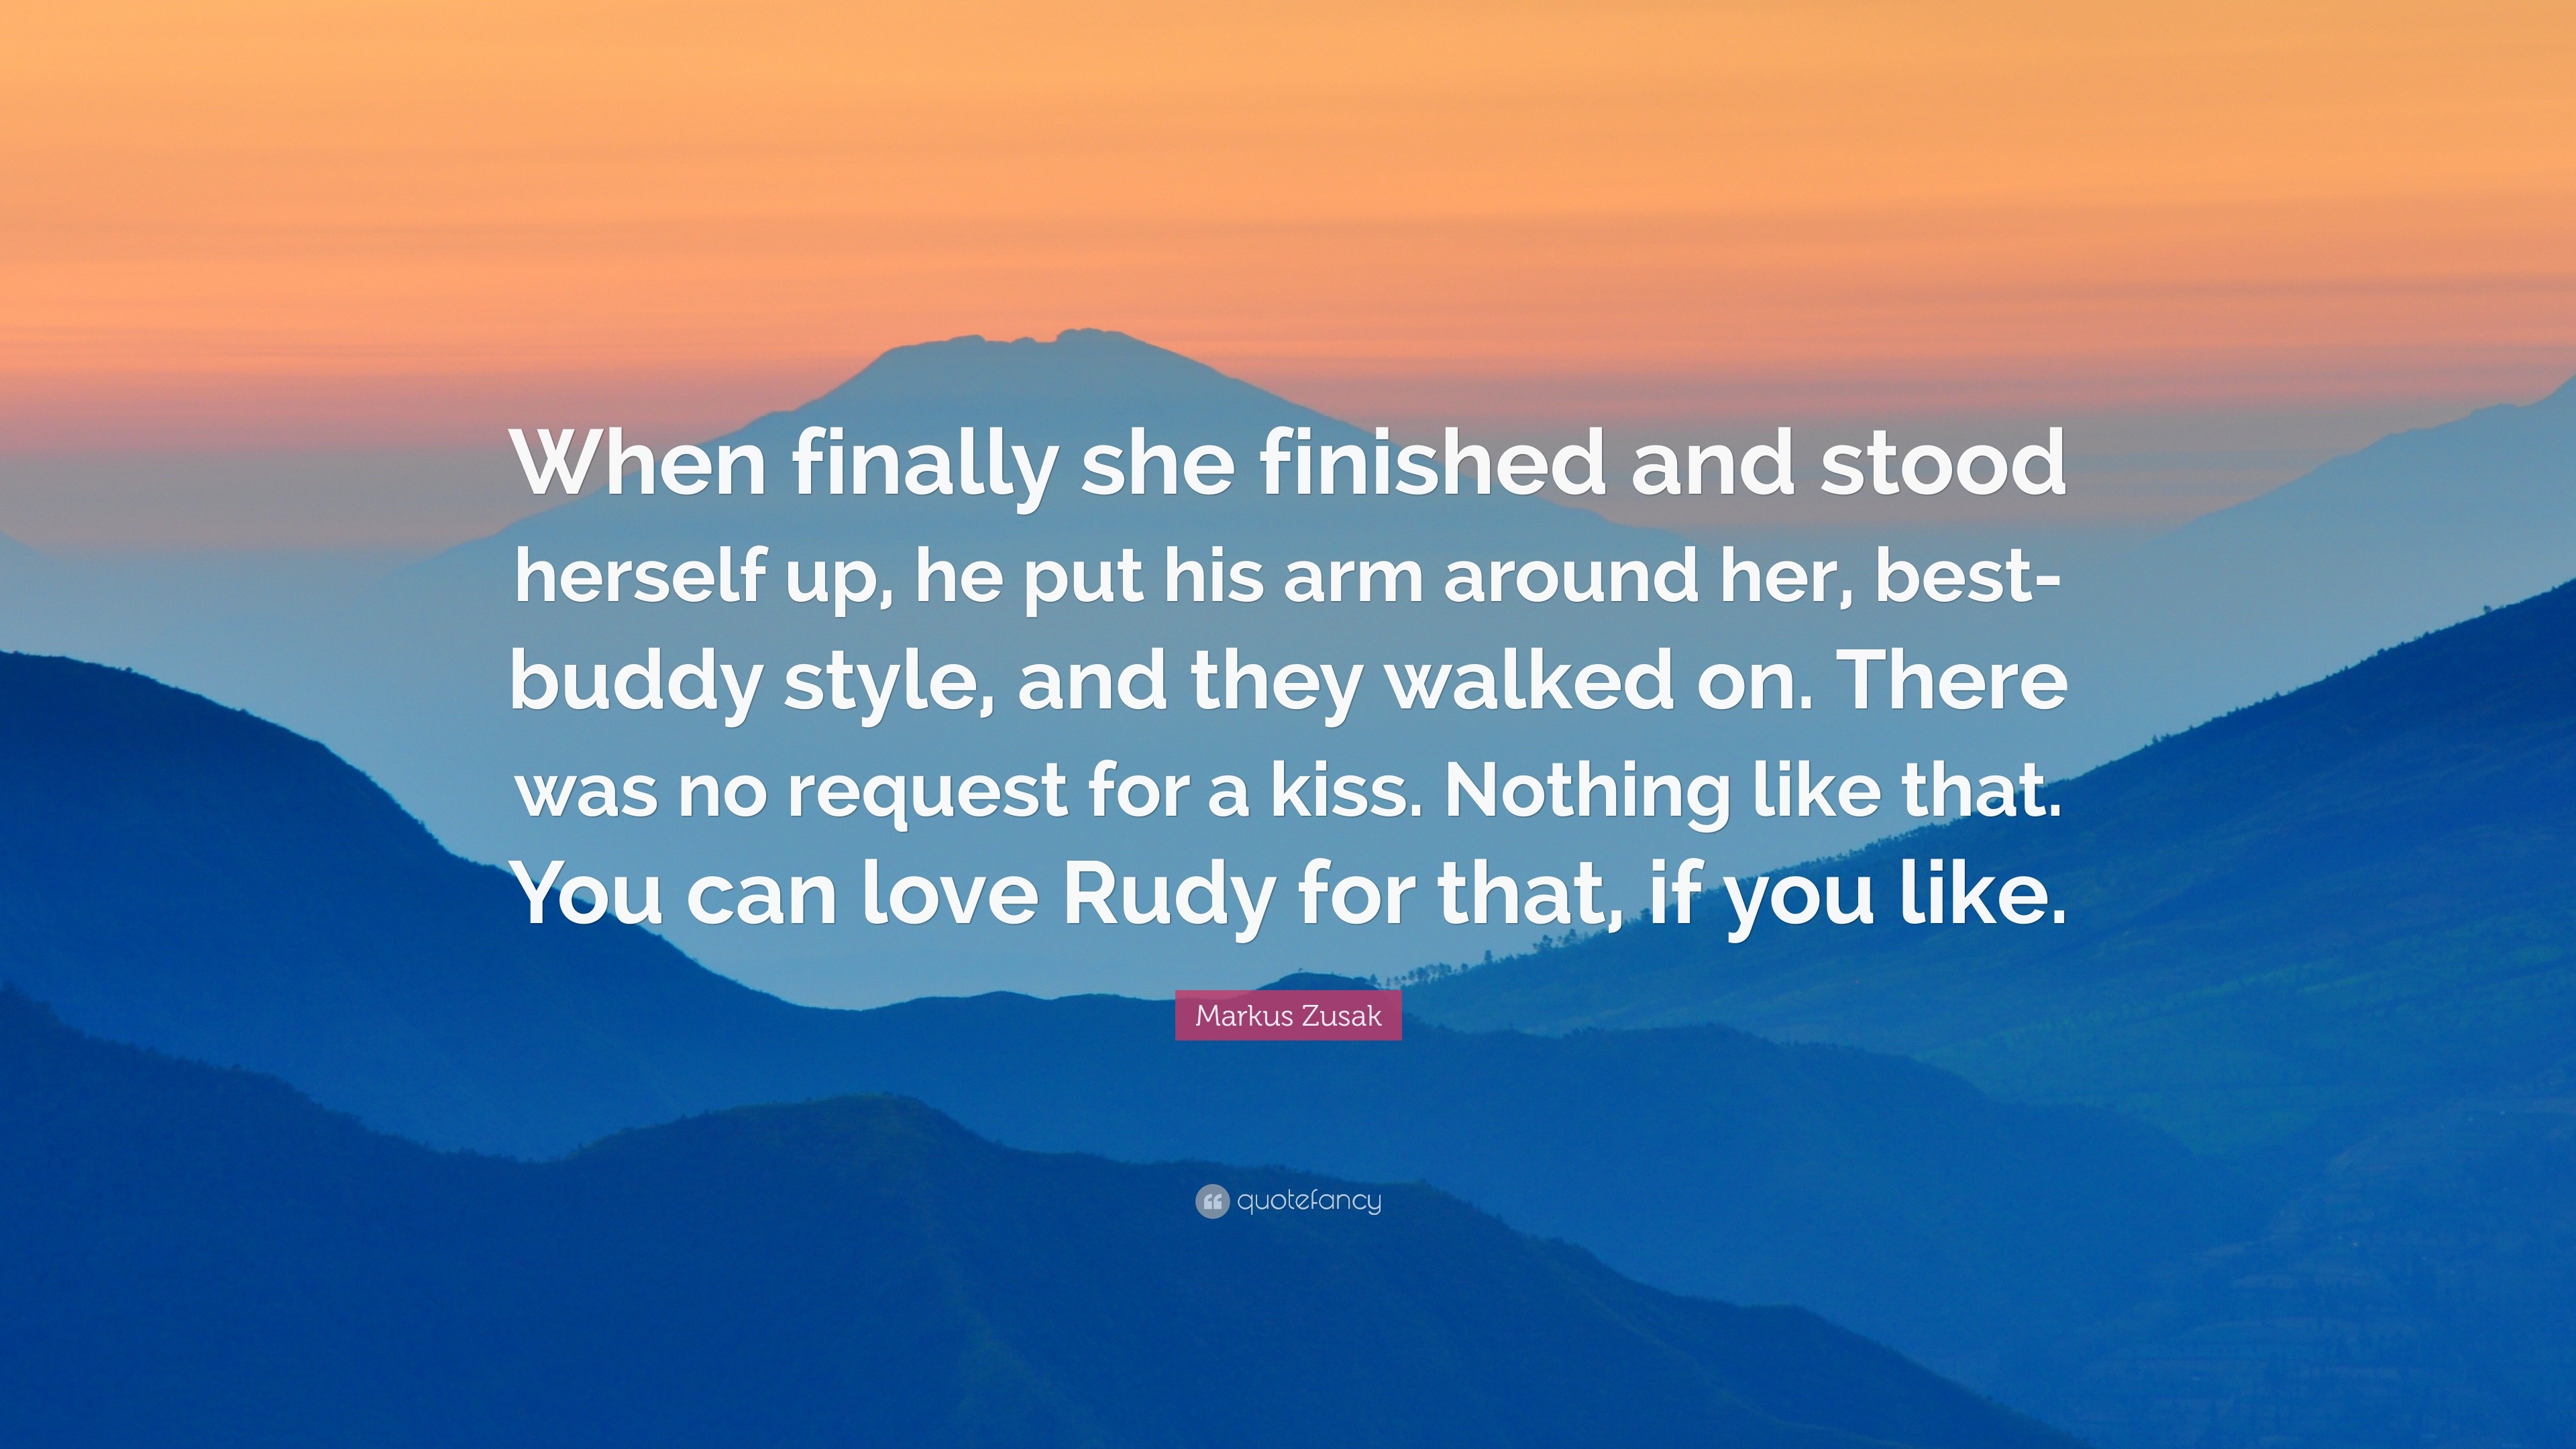 Markus Zusak Quote “When finally she finished and stood herself up he put